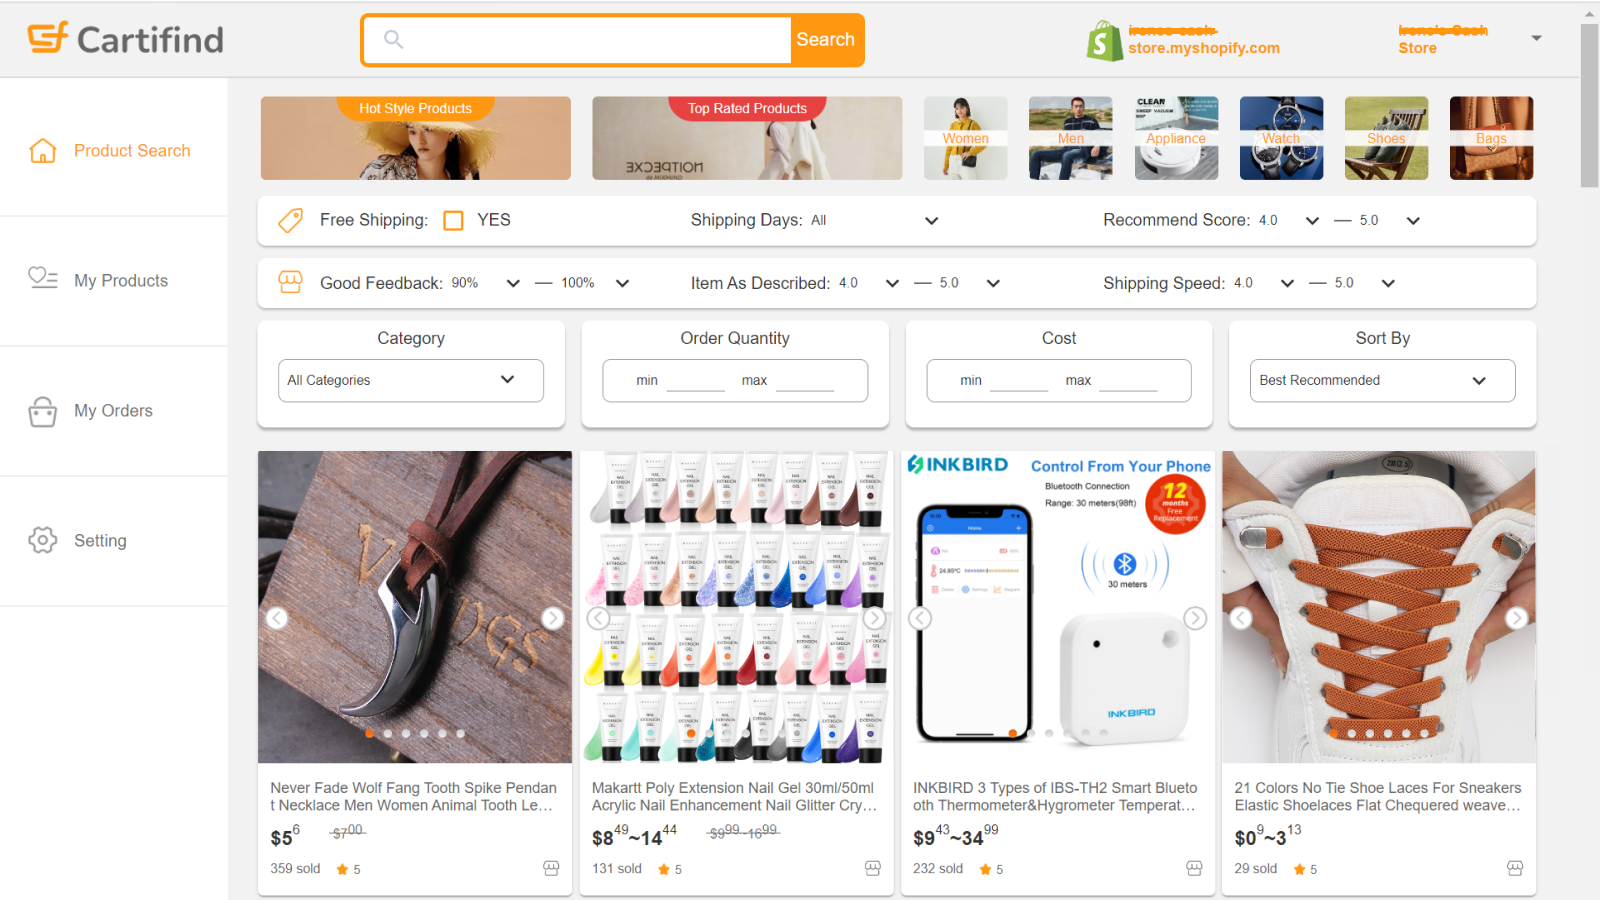 Products Search - Cartifind find winning products